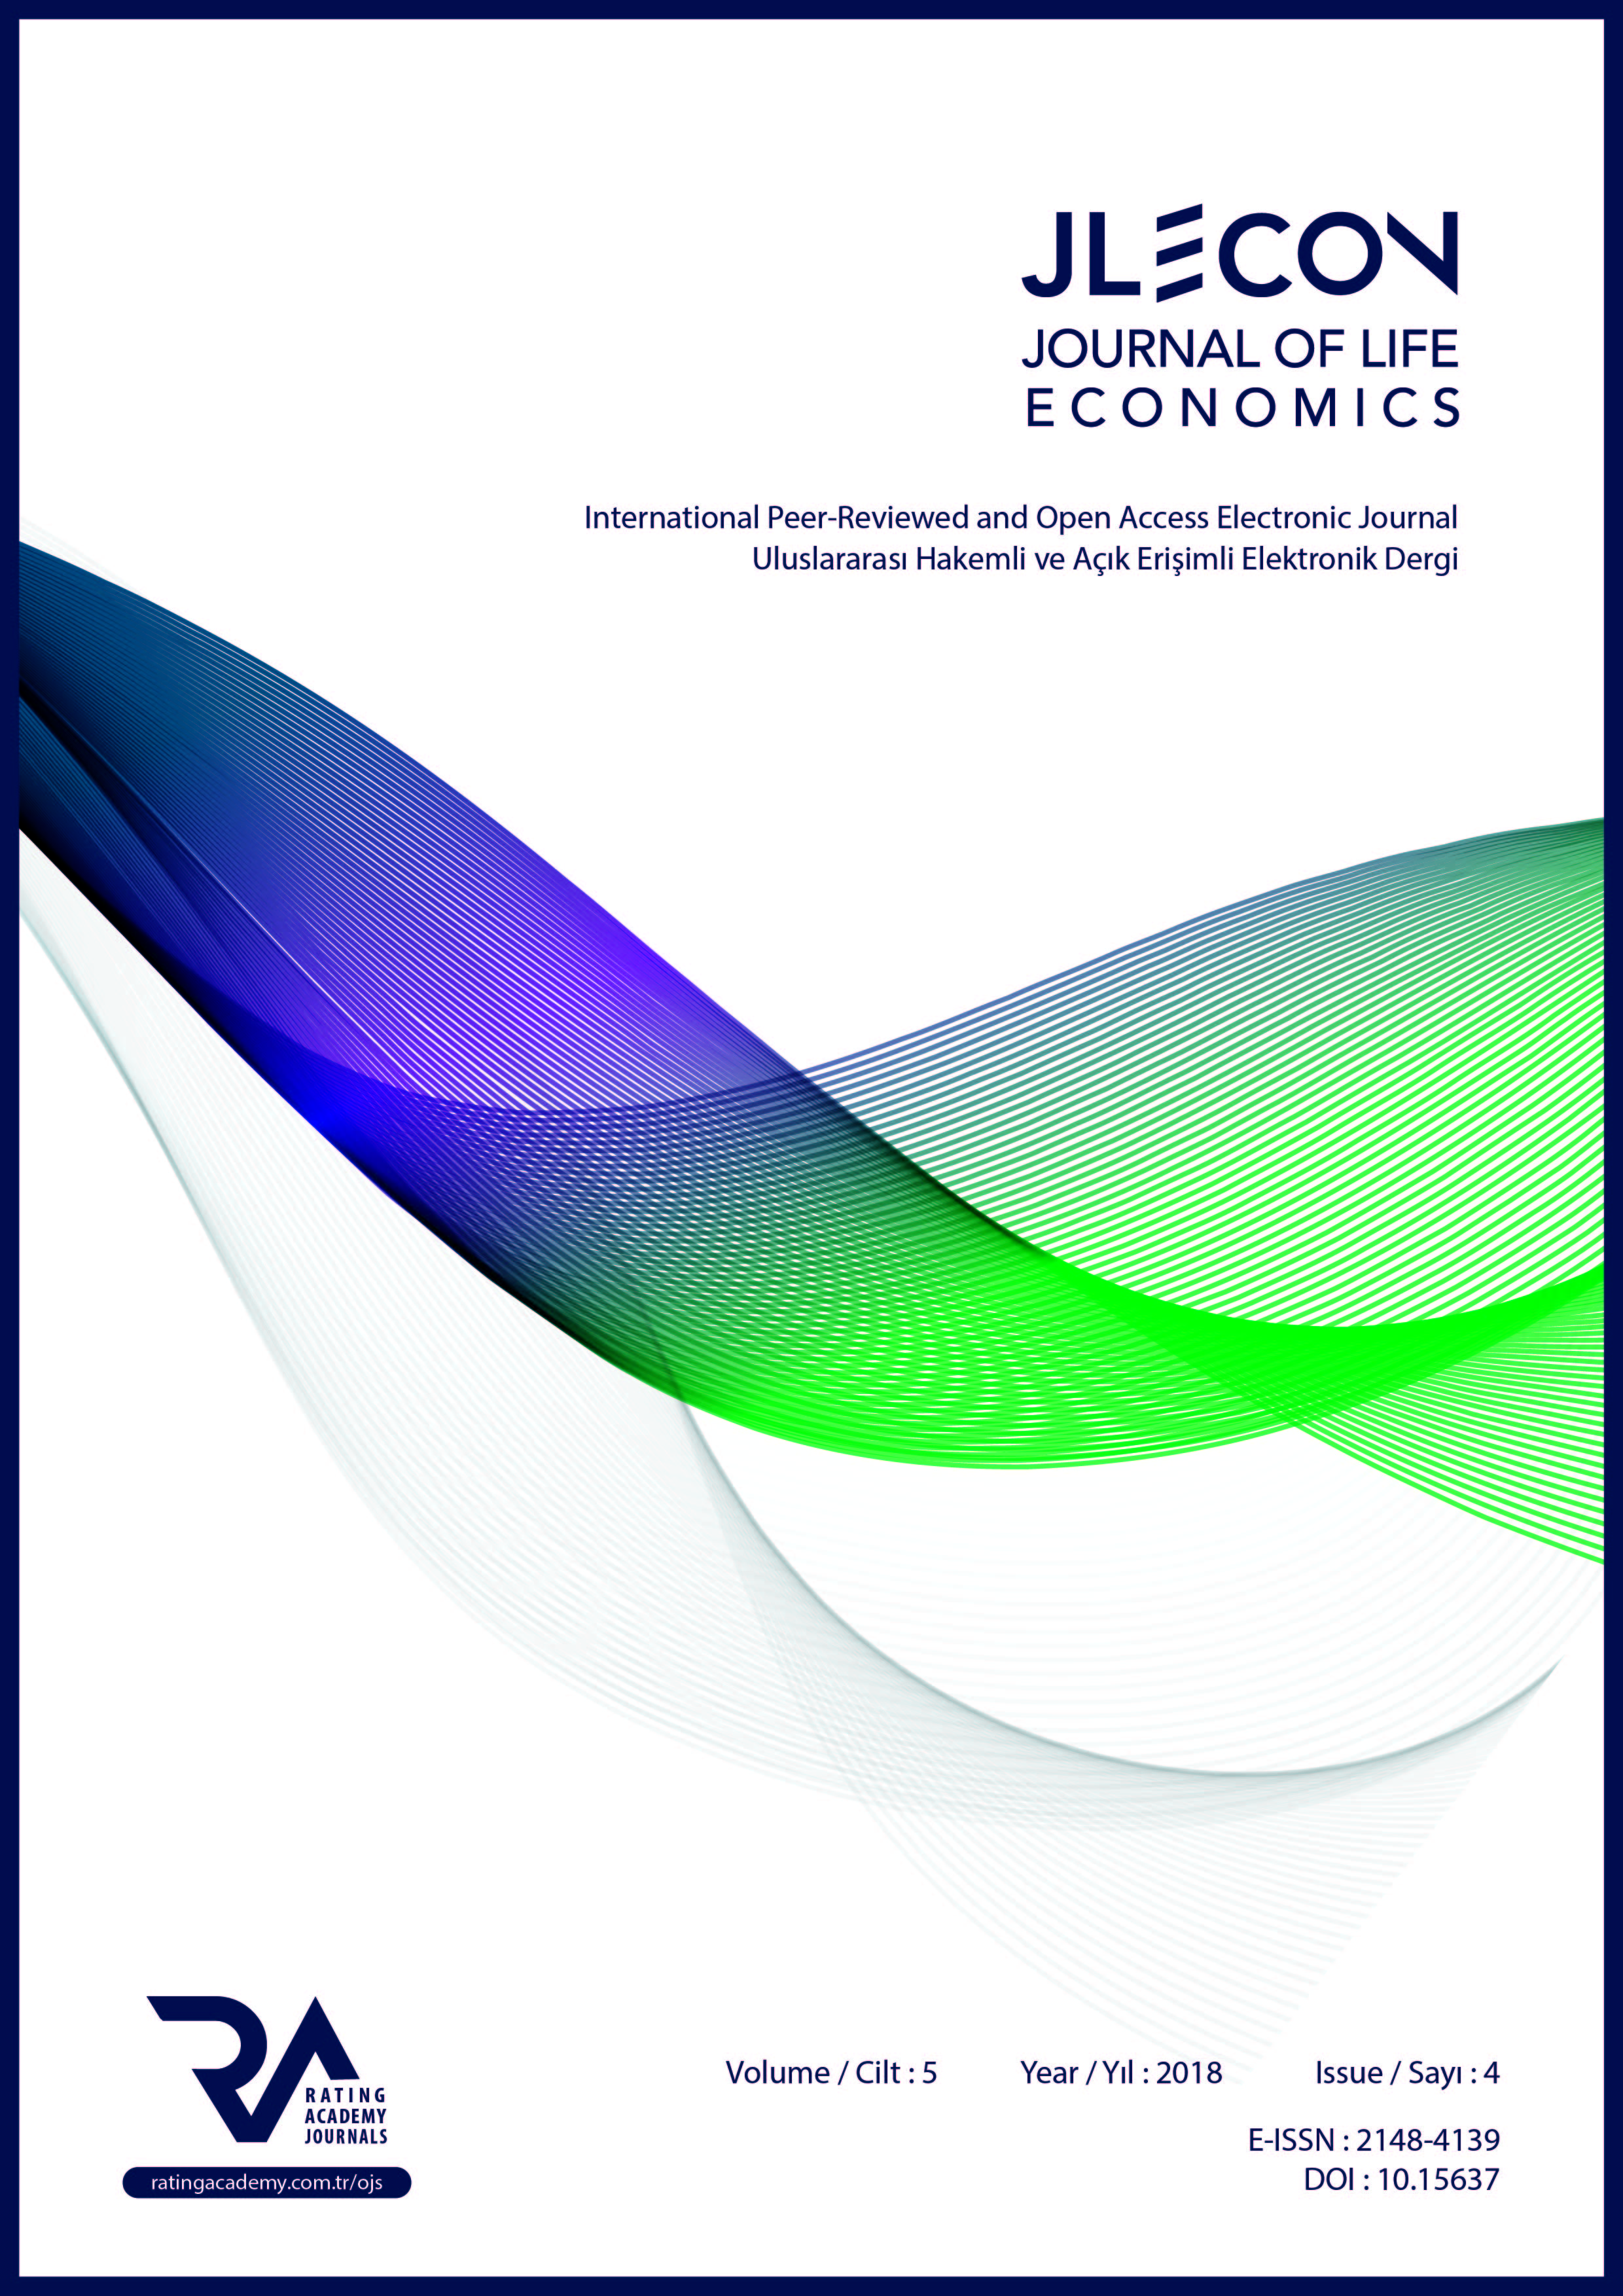 THE STUDY OF EVALUATION BRICS-T COUNTRIES BASED ON THE GLOBAL COMPETITIVENESS INDEX Cover Image